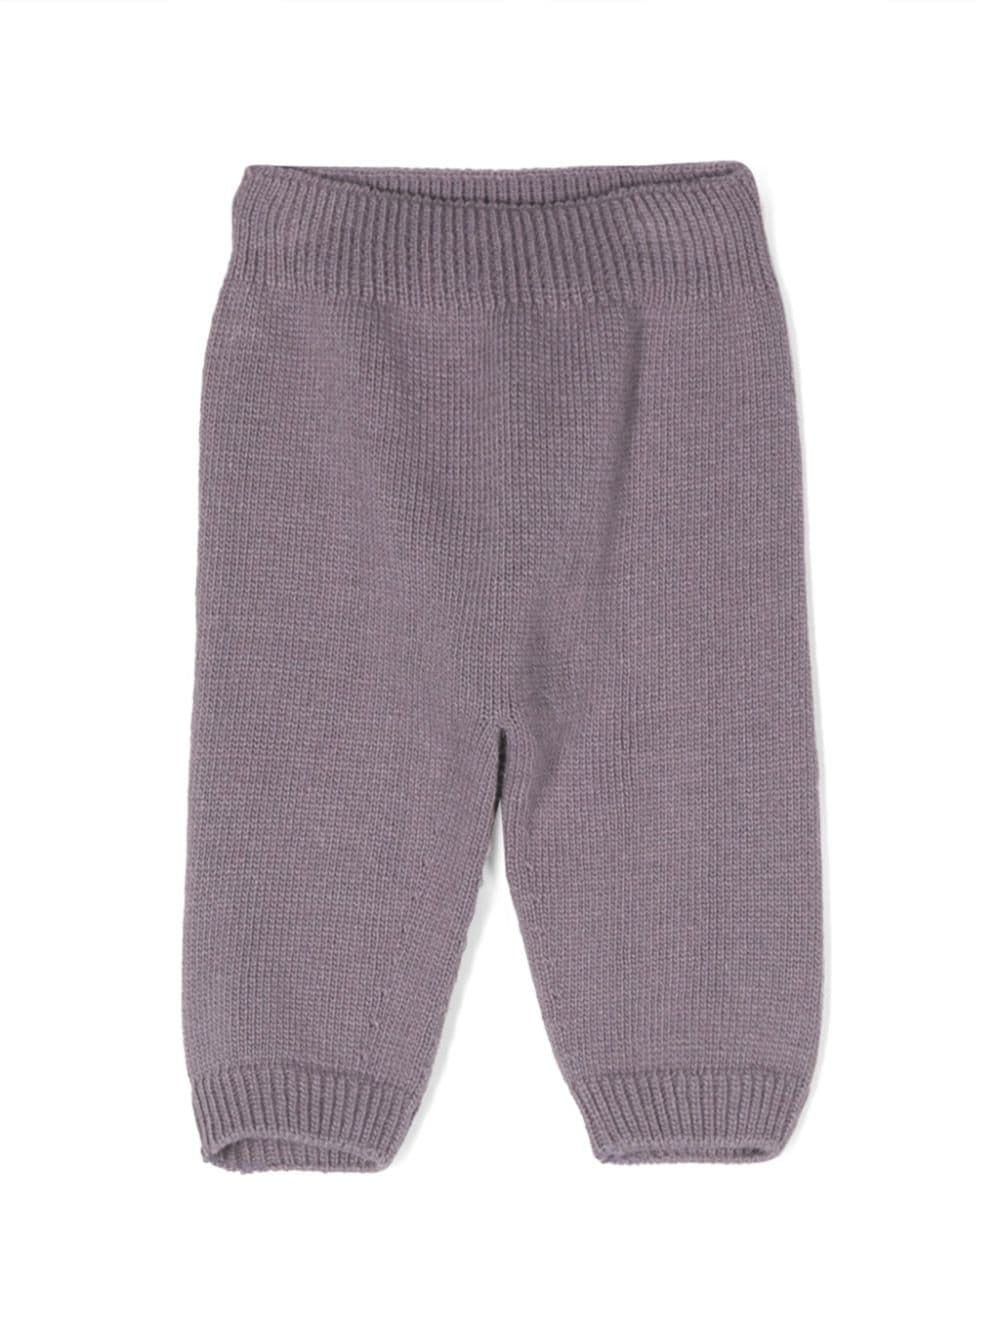 Knot Jeth knitted trousers - Purple von Knot